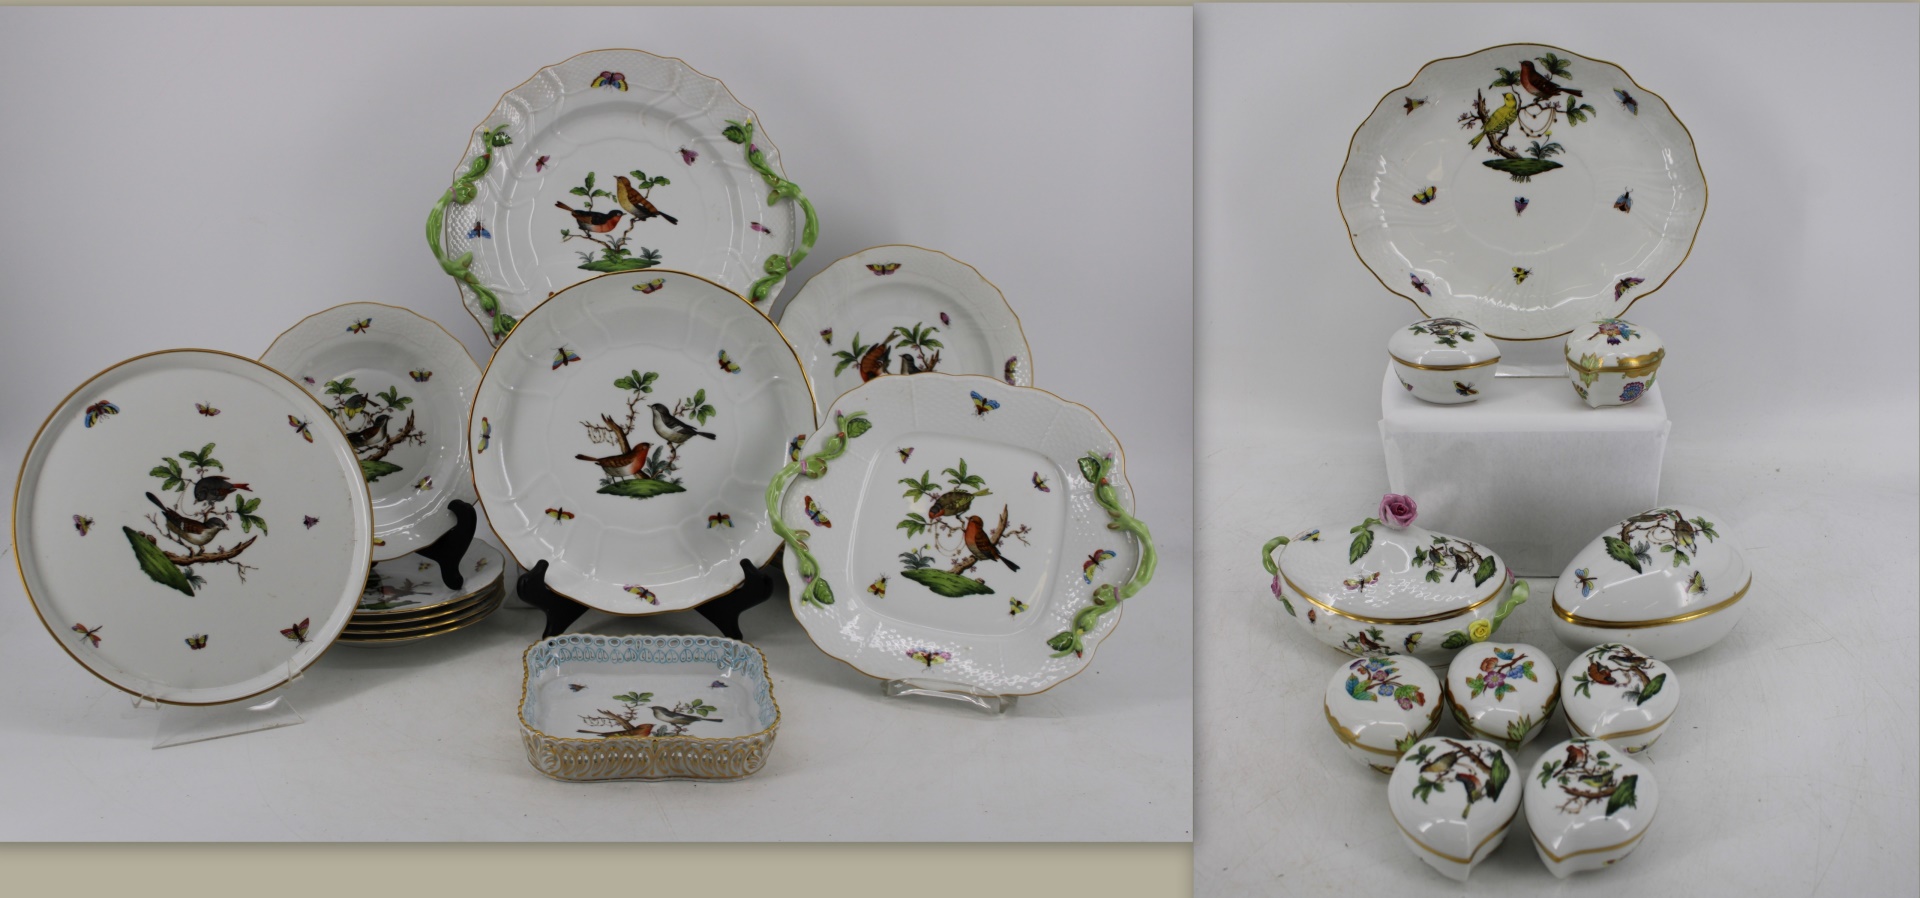 GROUP OF HEREND PORCELAIN CHINA  3bca87